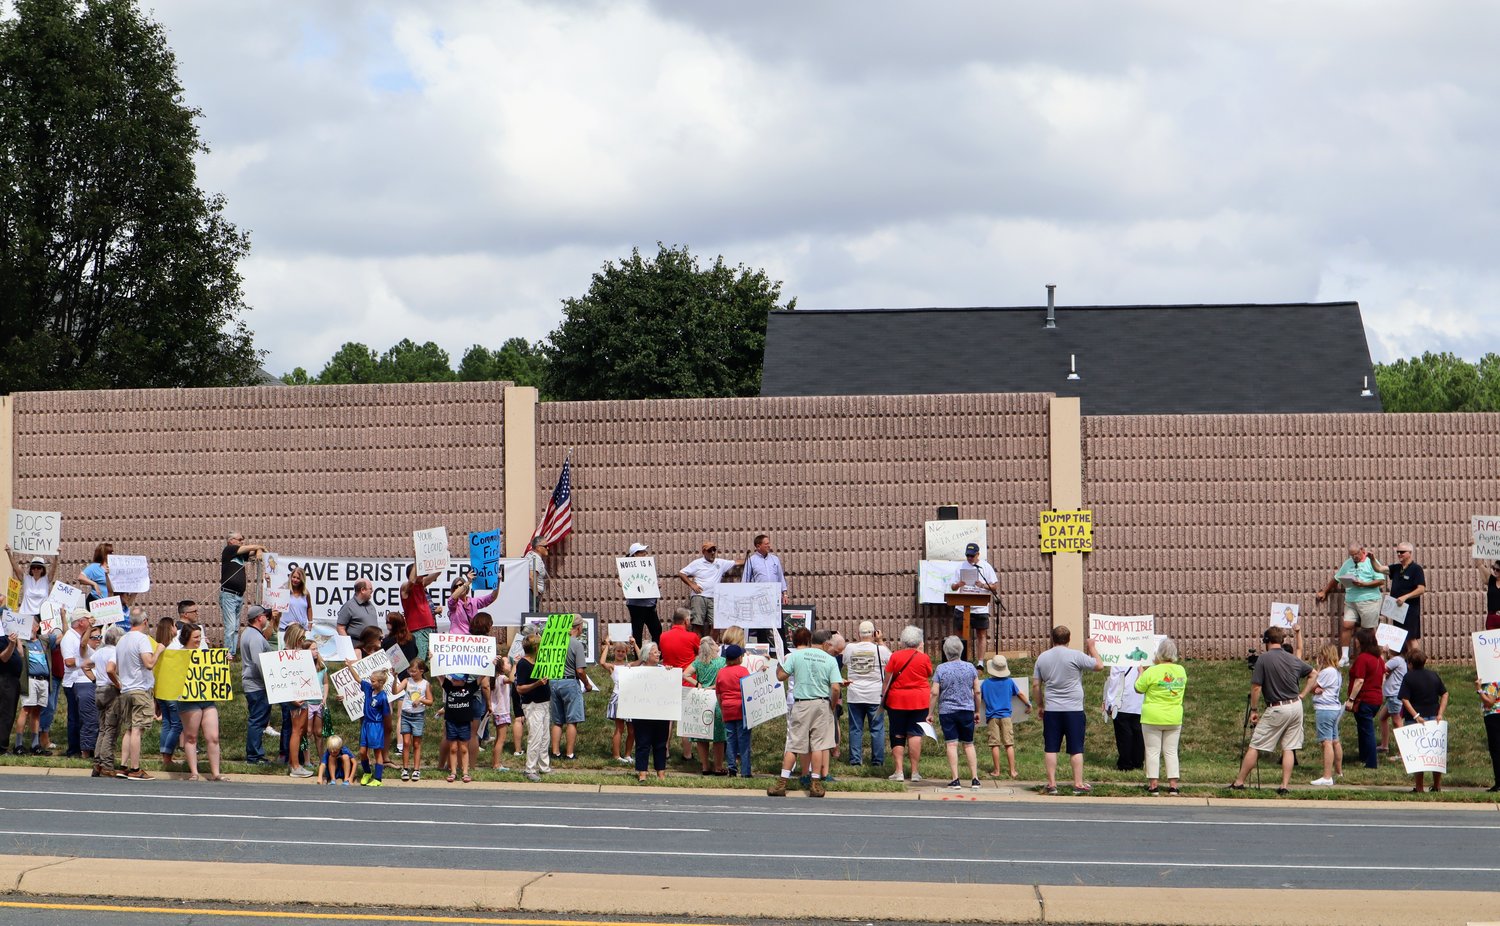 More than 100 protesters of the Bristow data centers hold signs along Linton Hall Road.